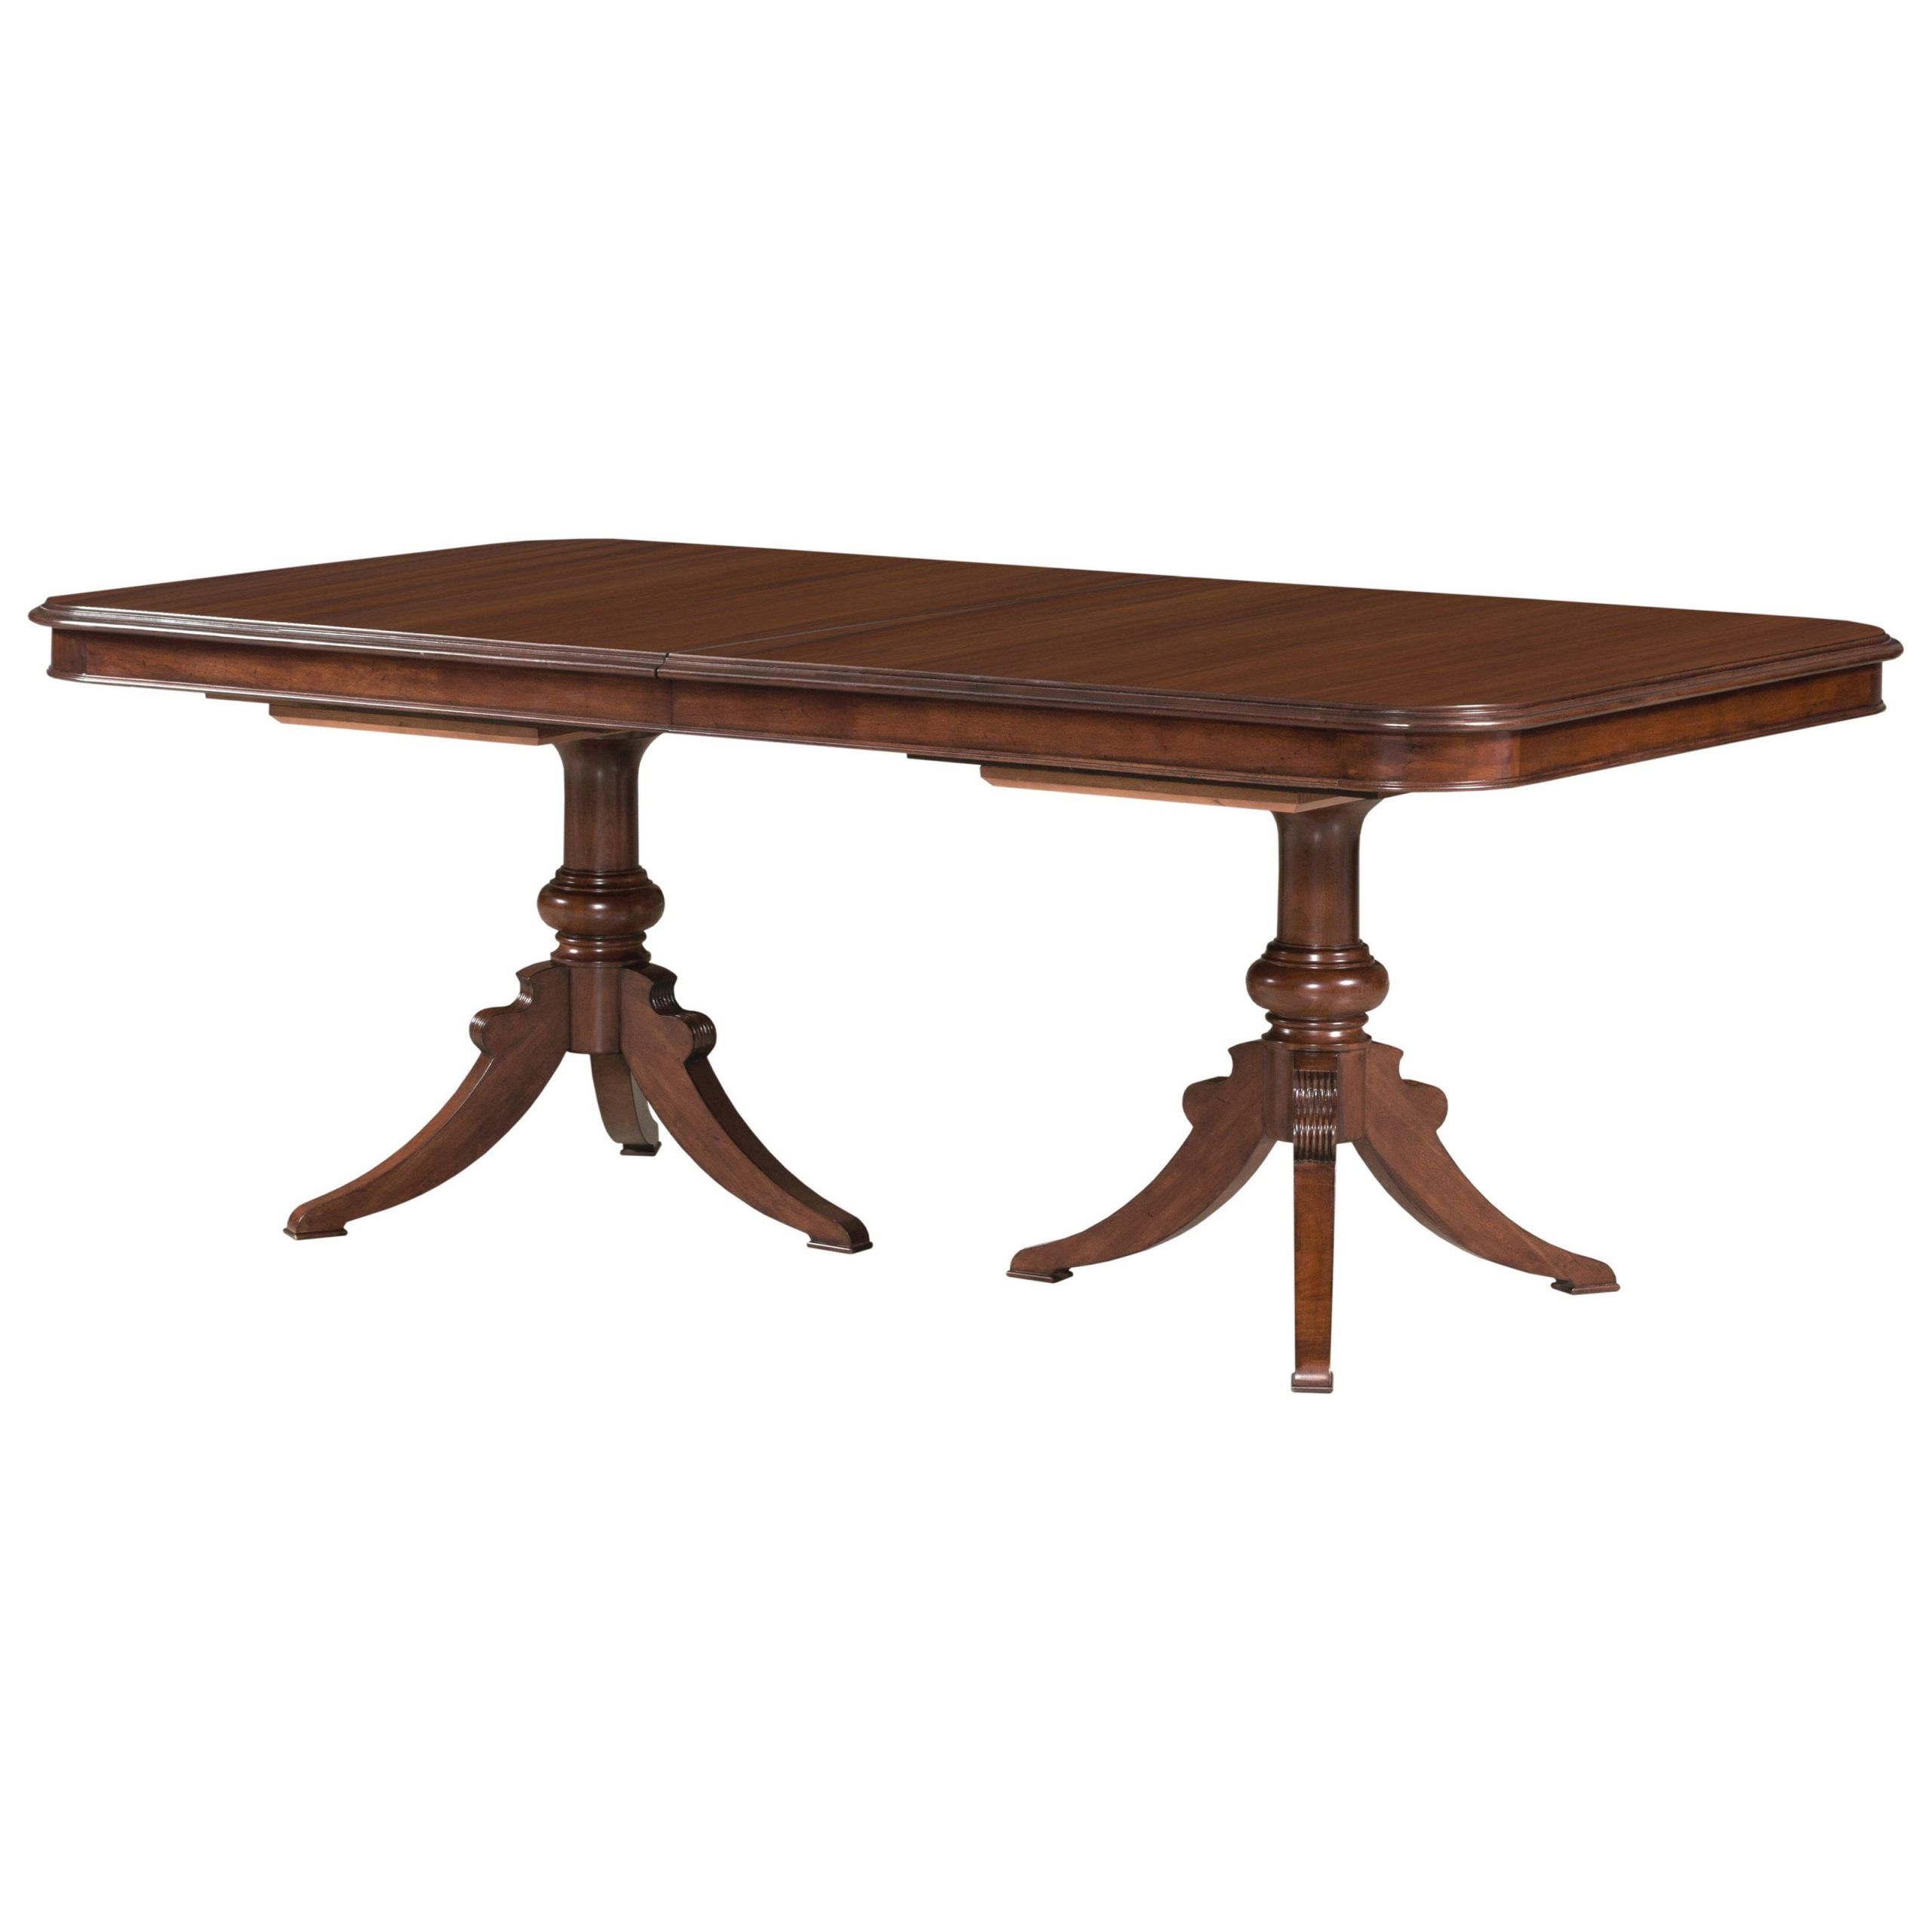 Kincaid Furniture Hadleigh Traditional Double Pedestal With Regard To Well Known Kirt Pedestal Dining Tables (View 4 of 20)